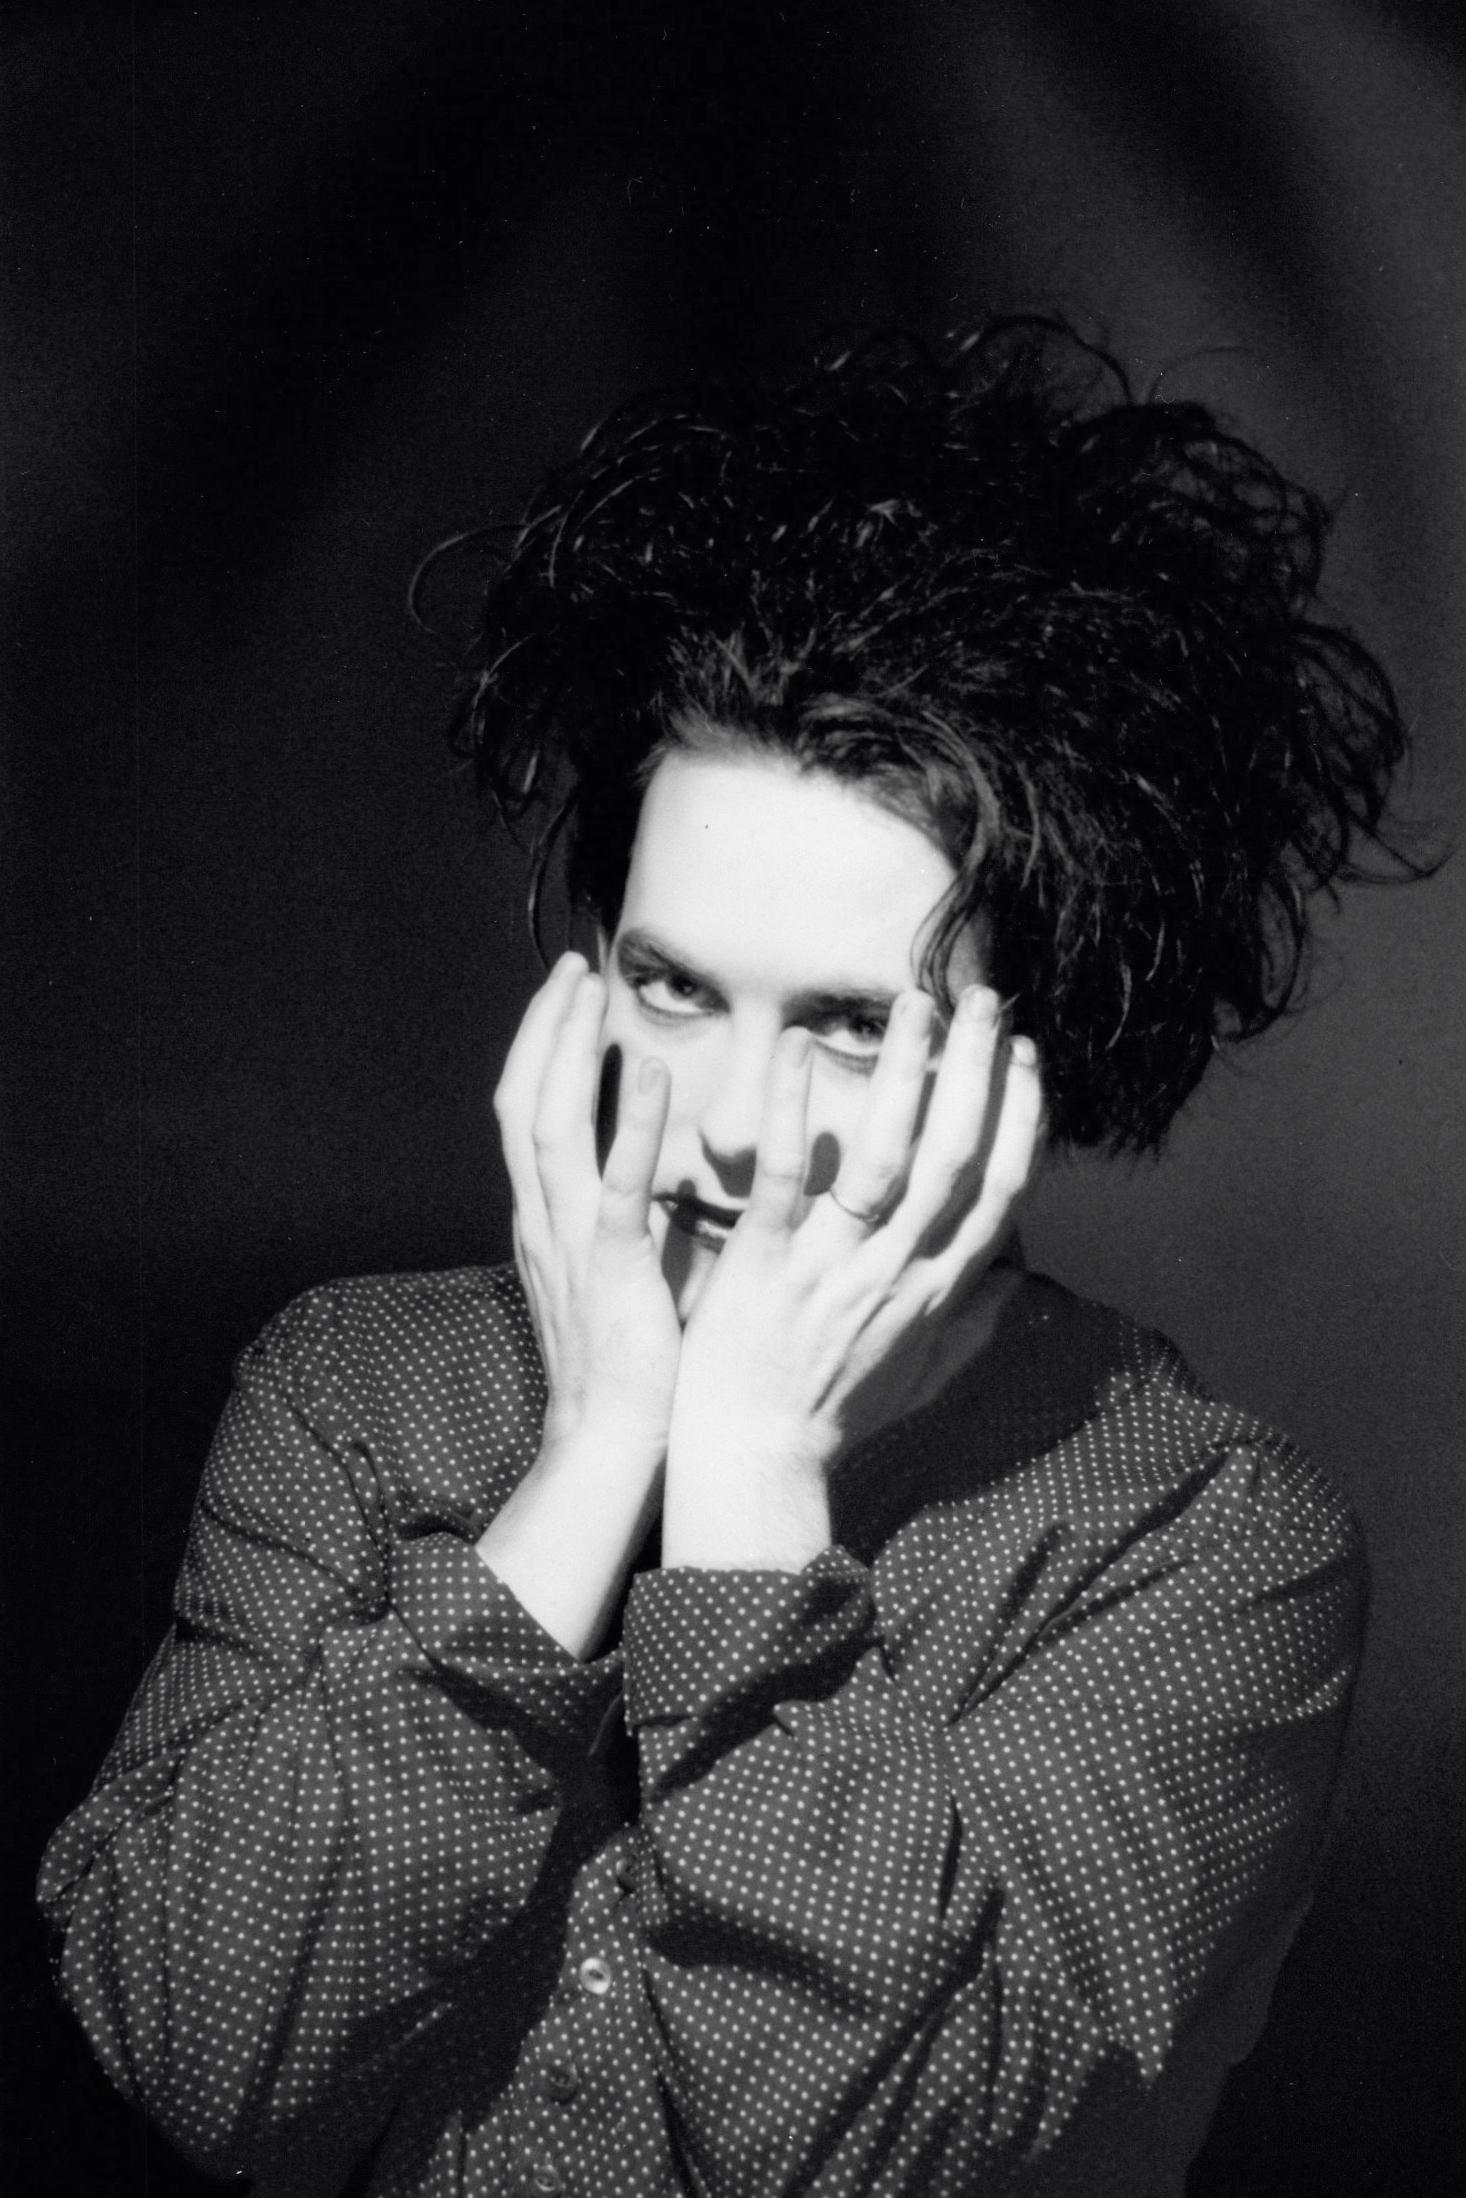 Paul Cox Black and White Photograph - Robert Smith of The Cure Posed in the Studio II Vintage Original Photograph